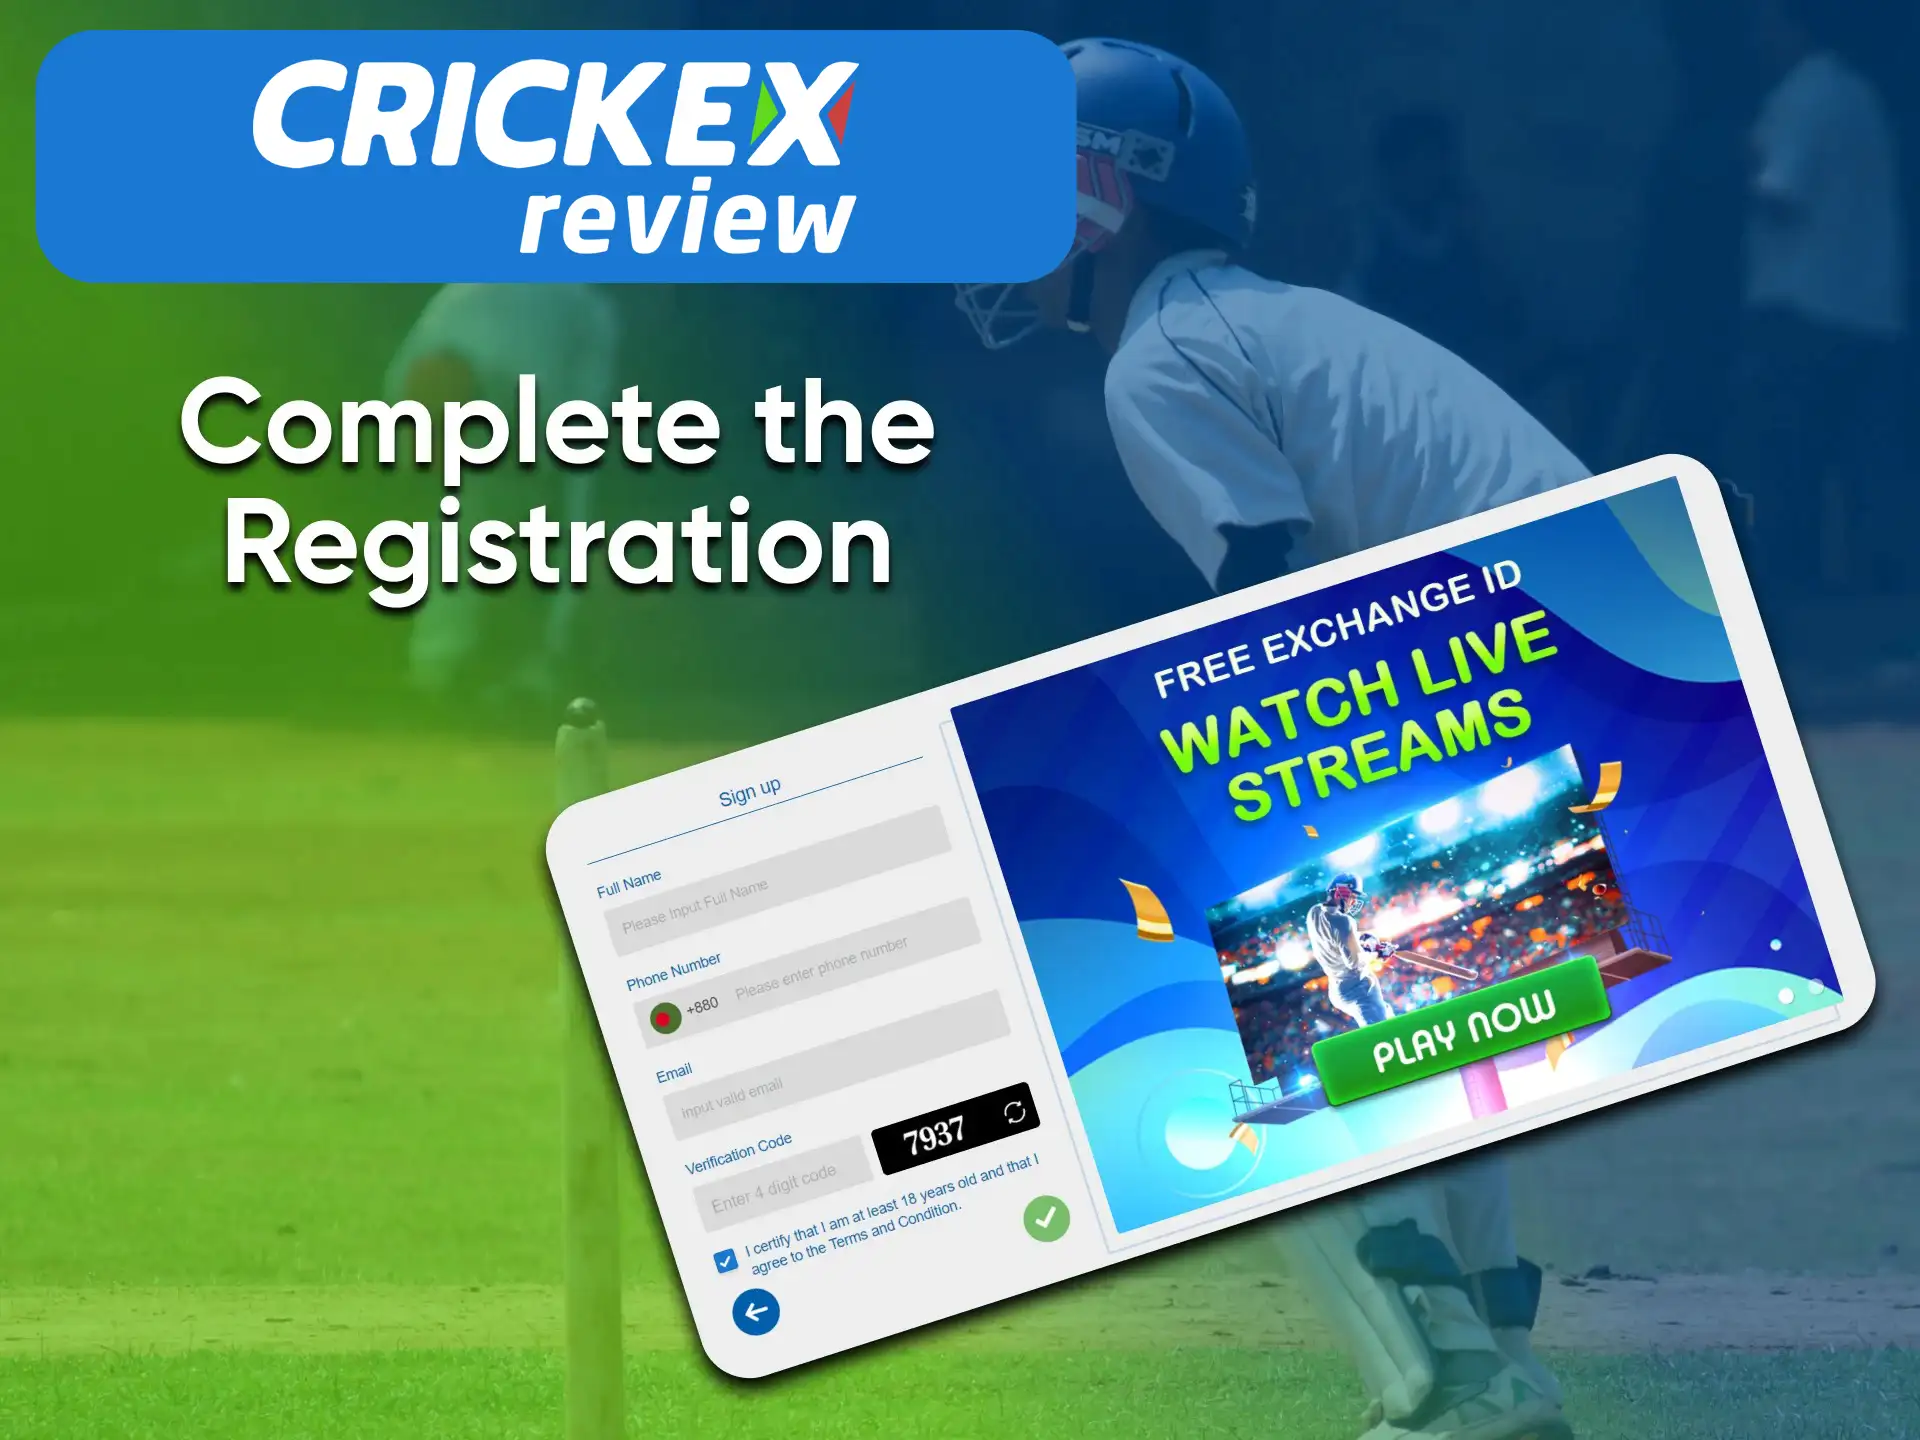 Complete all registration conditions to successfully create a Crickex account.